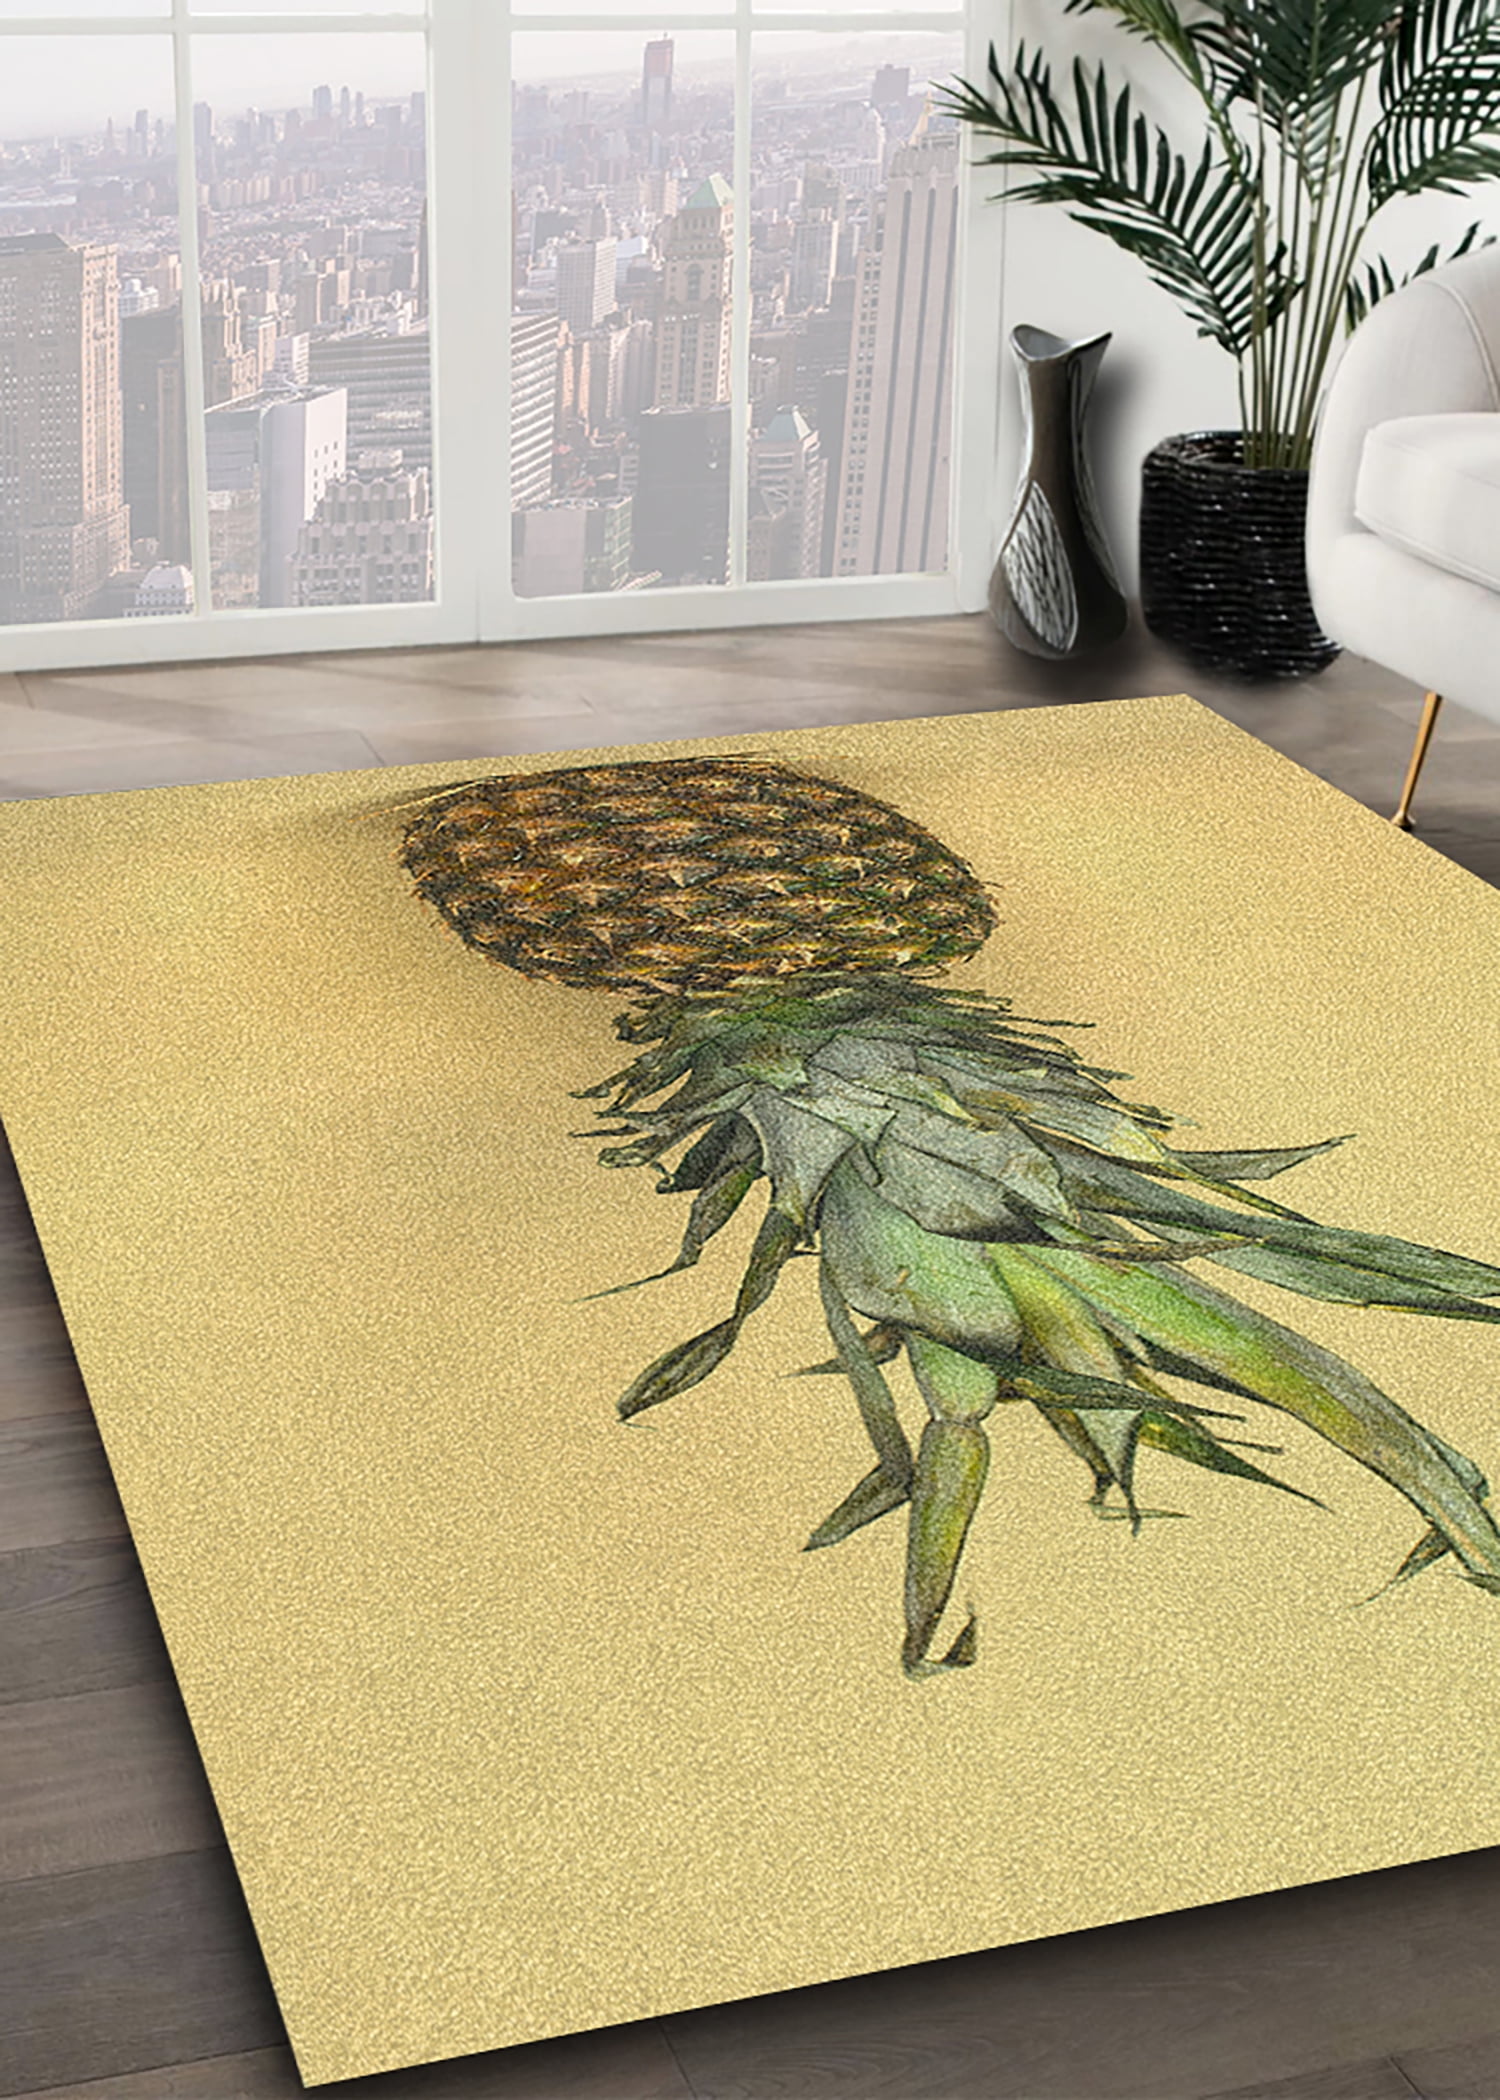 Ultra Soft Indoor Area Rug Runner Colorful Pattern with Pineapples Fluffy Area Rugs for Living Room Small Carpets for Home Decor Bathroom Play Room Children Nursery Rug 2x3 Feet 